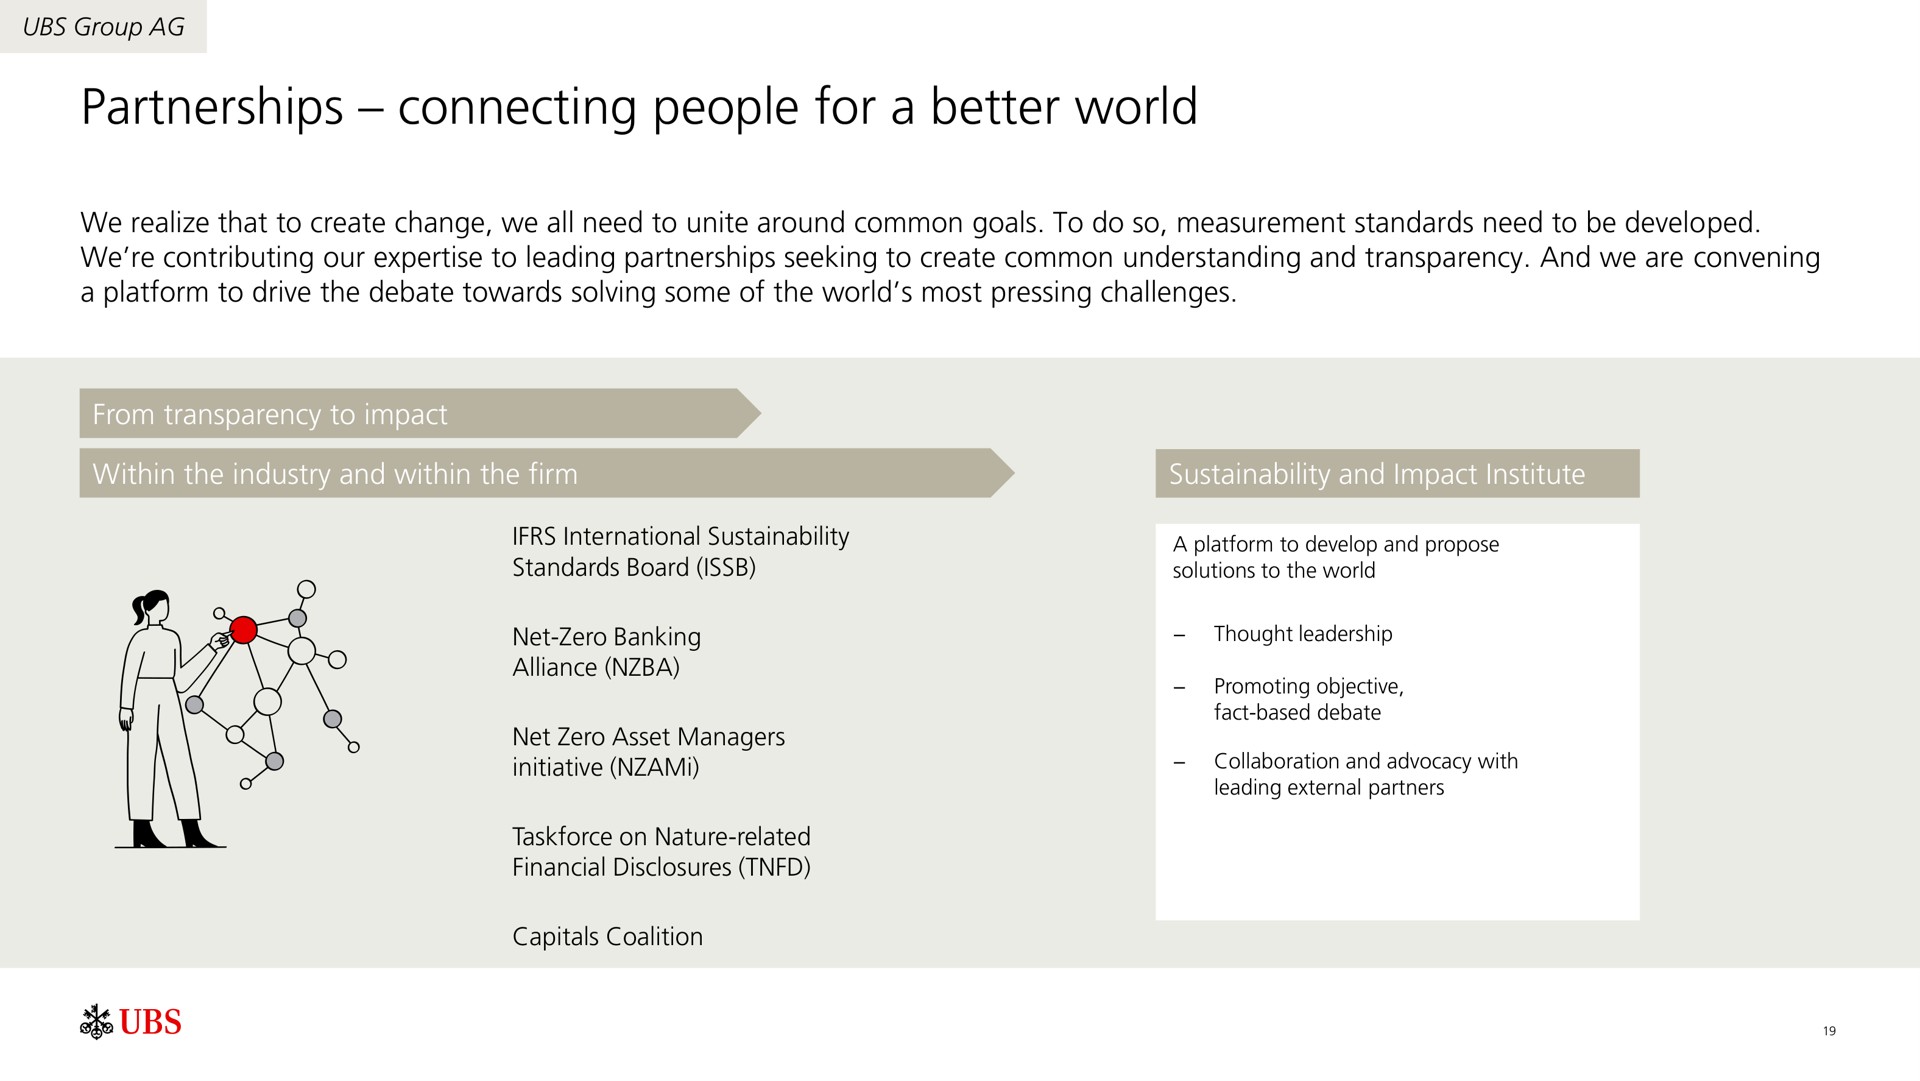 partnerships connecting people for a better world | UBS